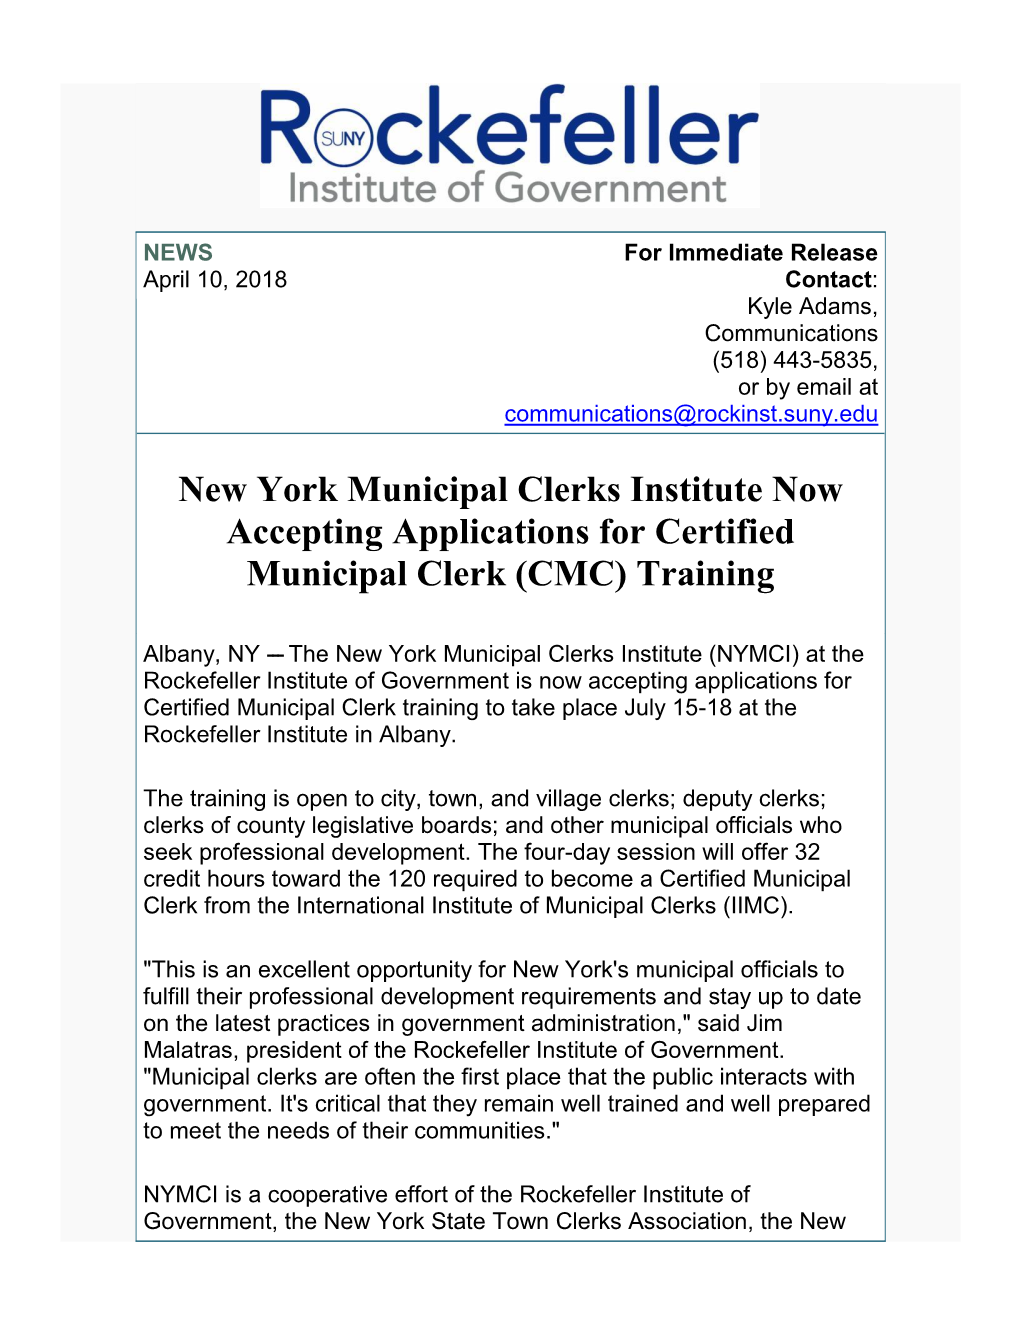 New York Municipal Clerks Institute Now Accepting Applications for Certified Municipal Clerk (CMC) Training